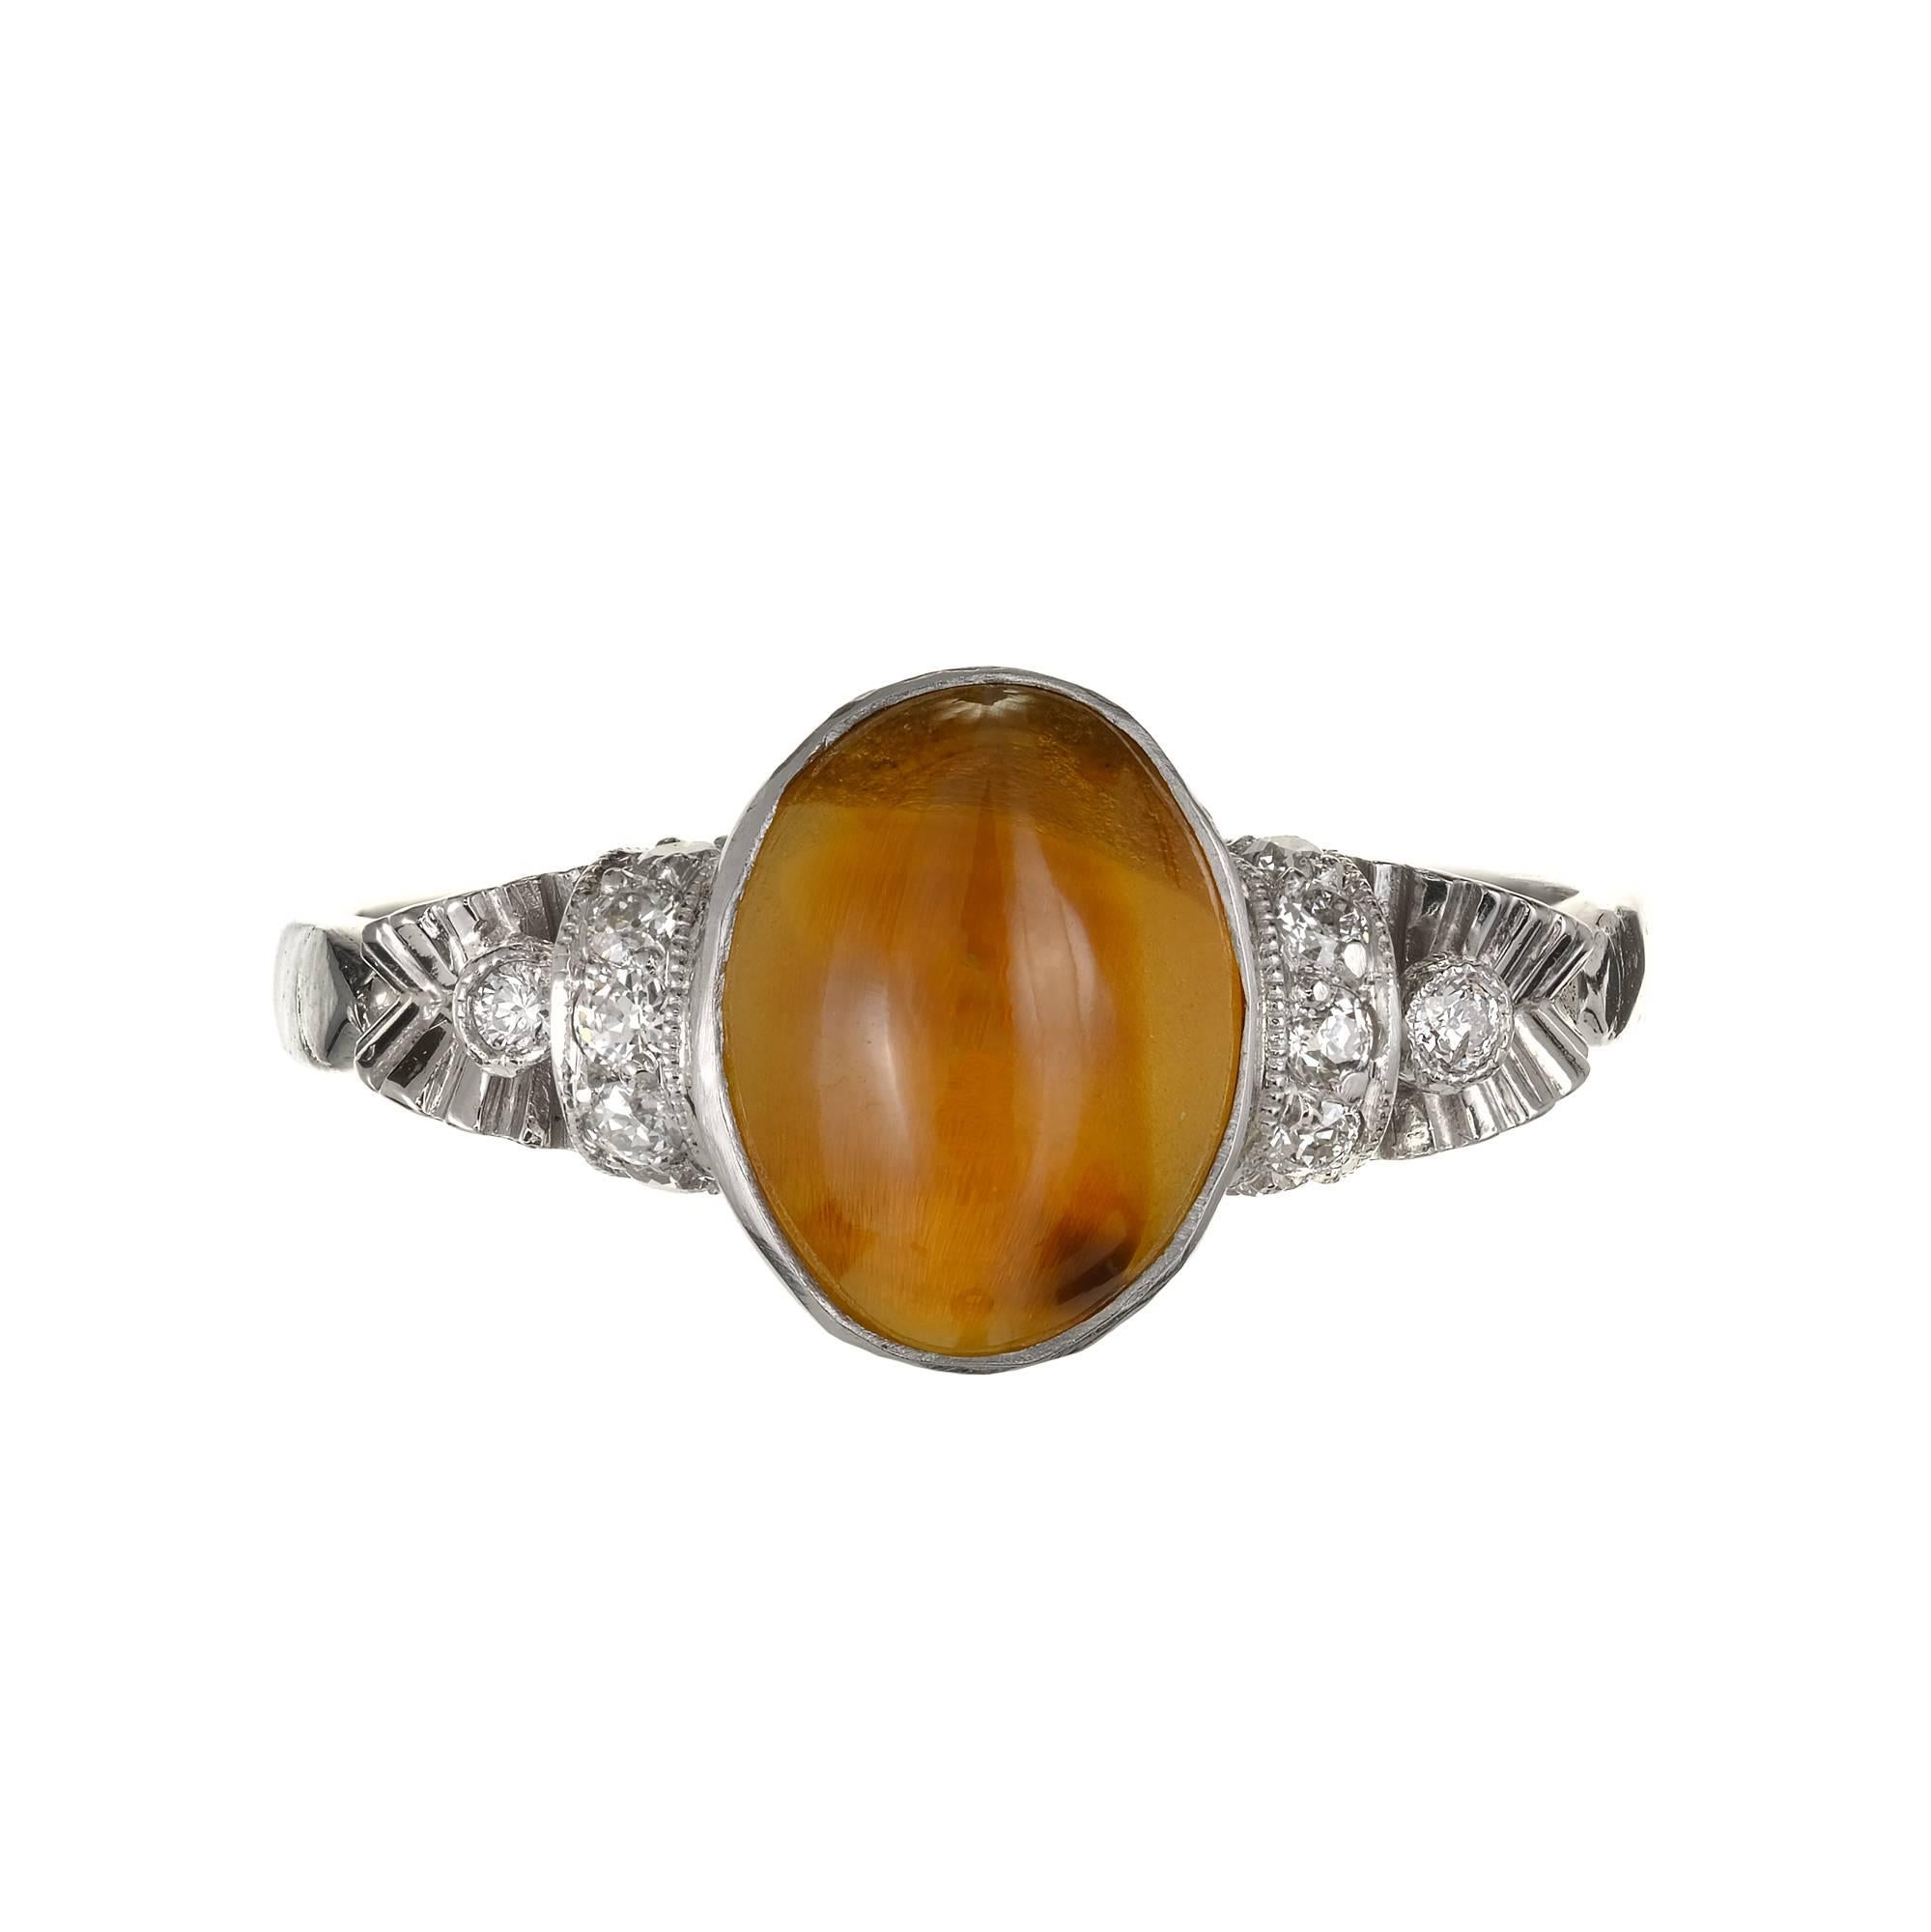 Art Deco 2.71ct Chrysoberyl Cat’s Eye and diamond Platinum engagement ring.  1920-1930 ring. GIA certified natural bright brown orange Chrysoberyl with a well-defined Cat’s Eye in a platinum setting with diamond accents. This stone exhibits a slight